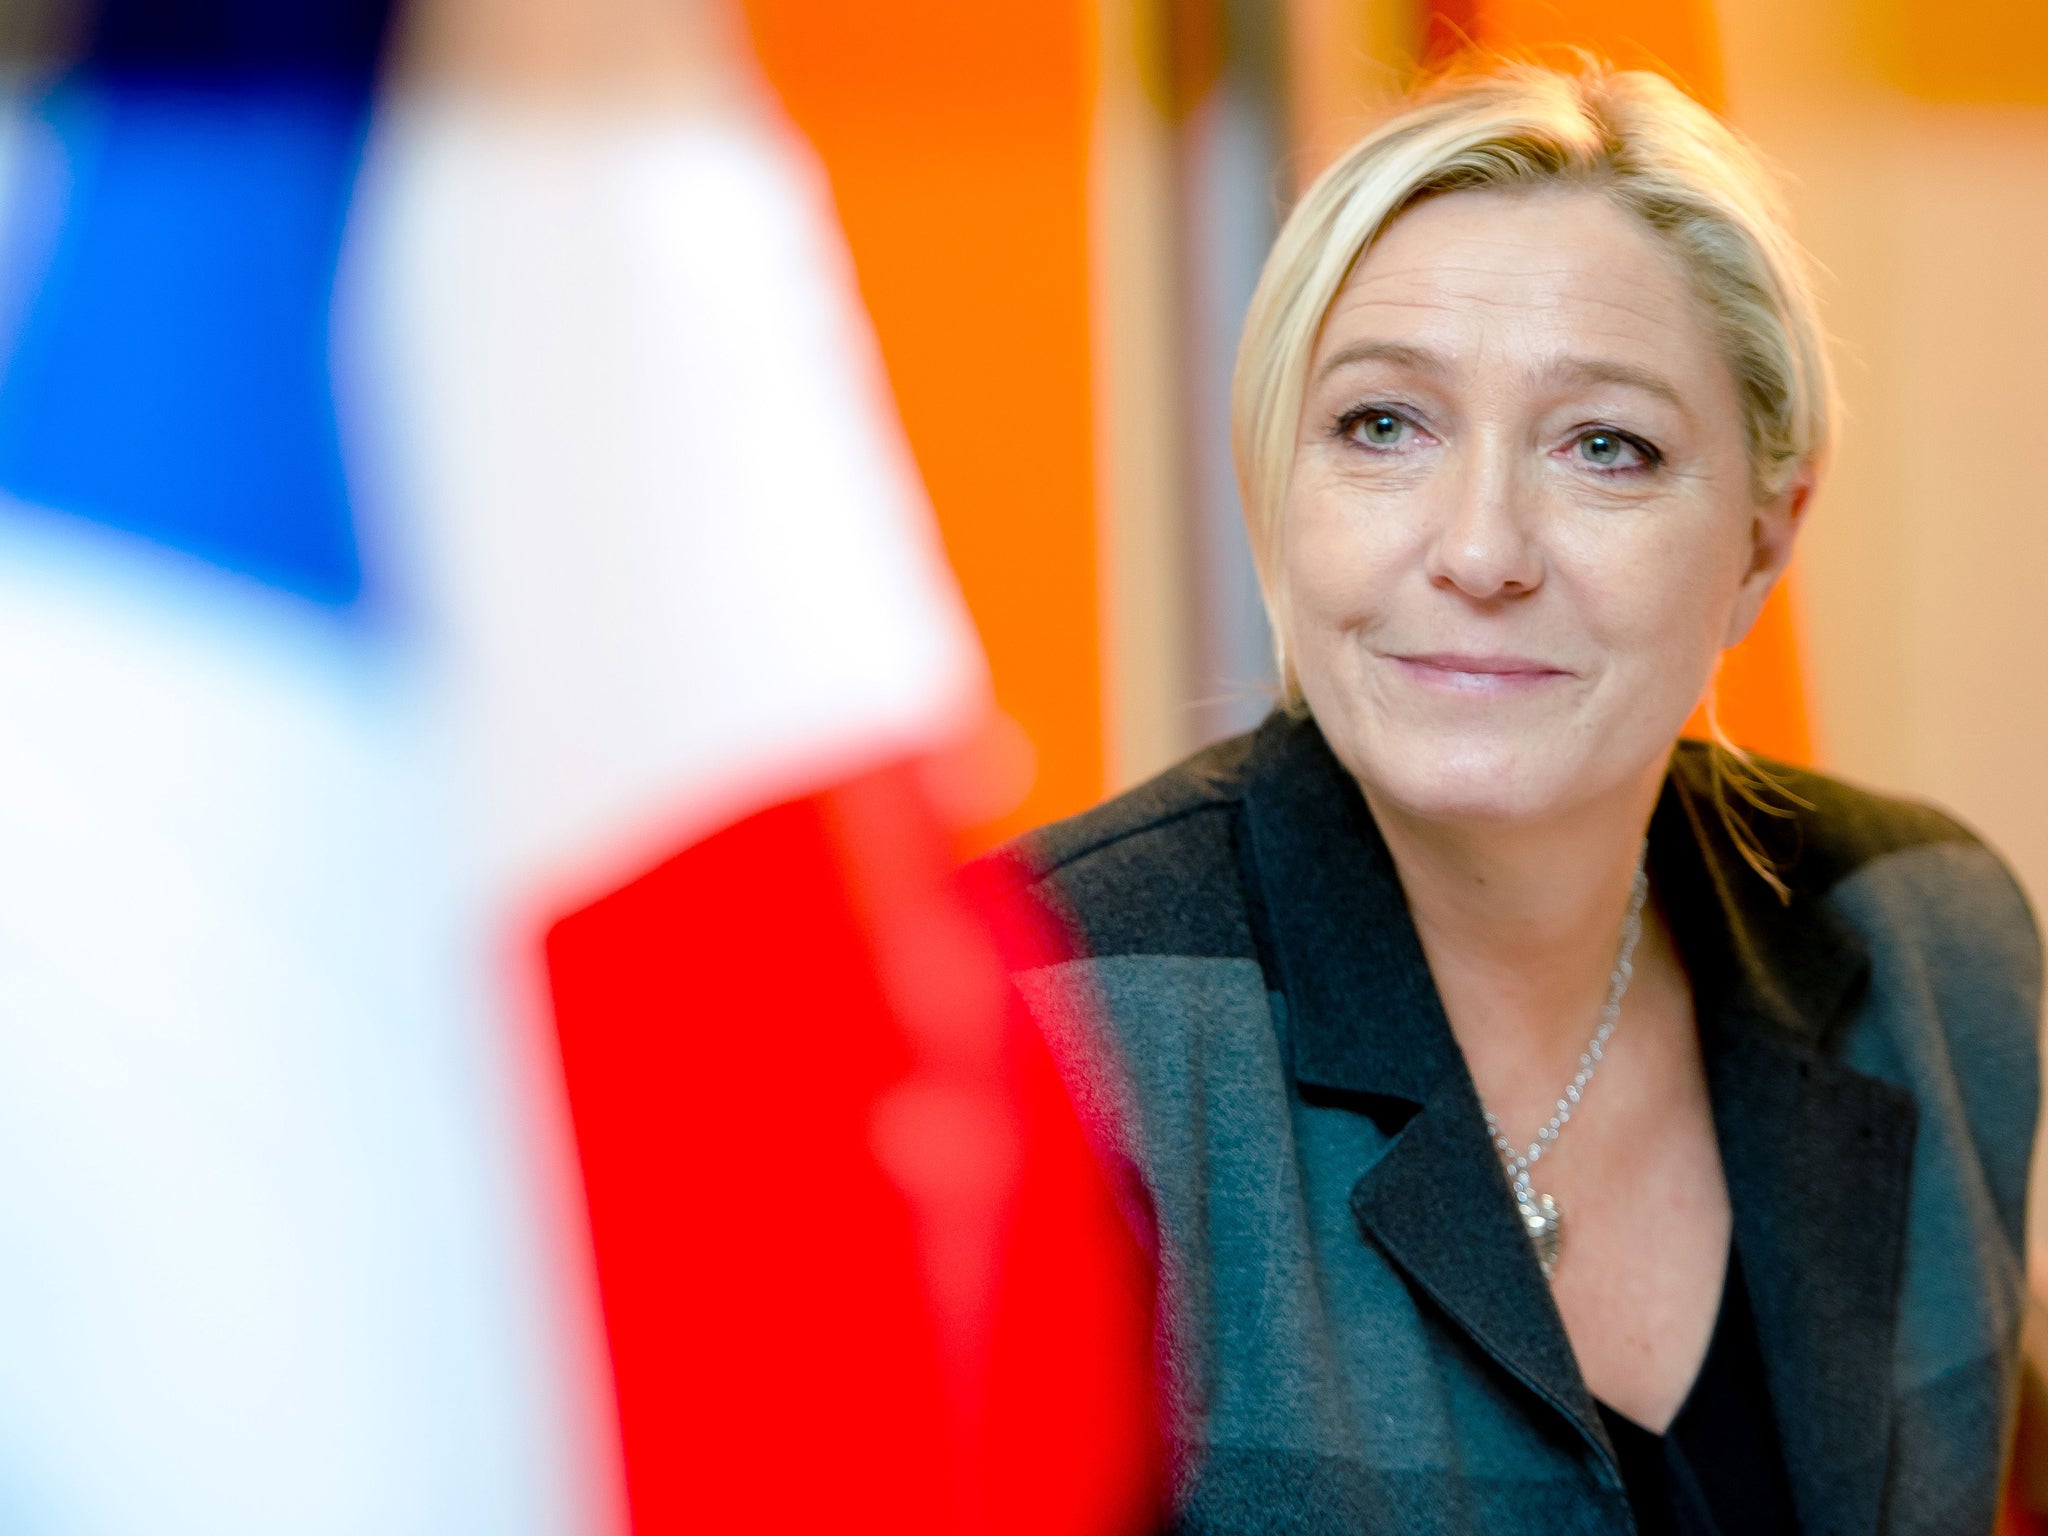 Marine Le Pen heads up the right-wing Front National Party in France